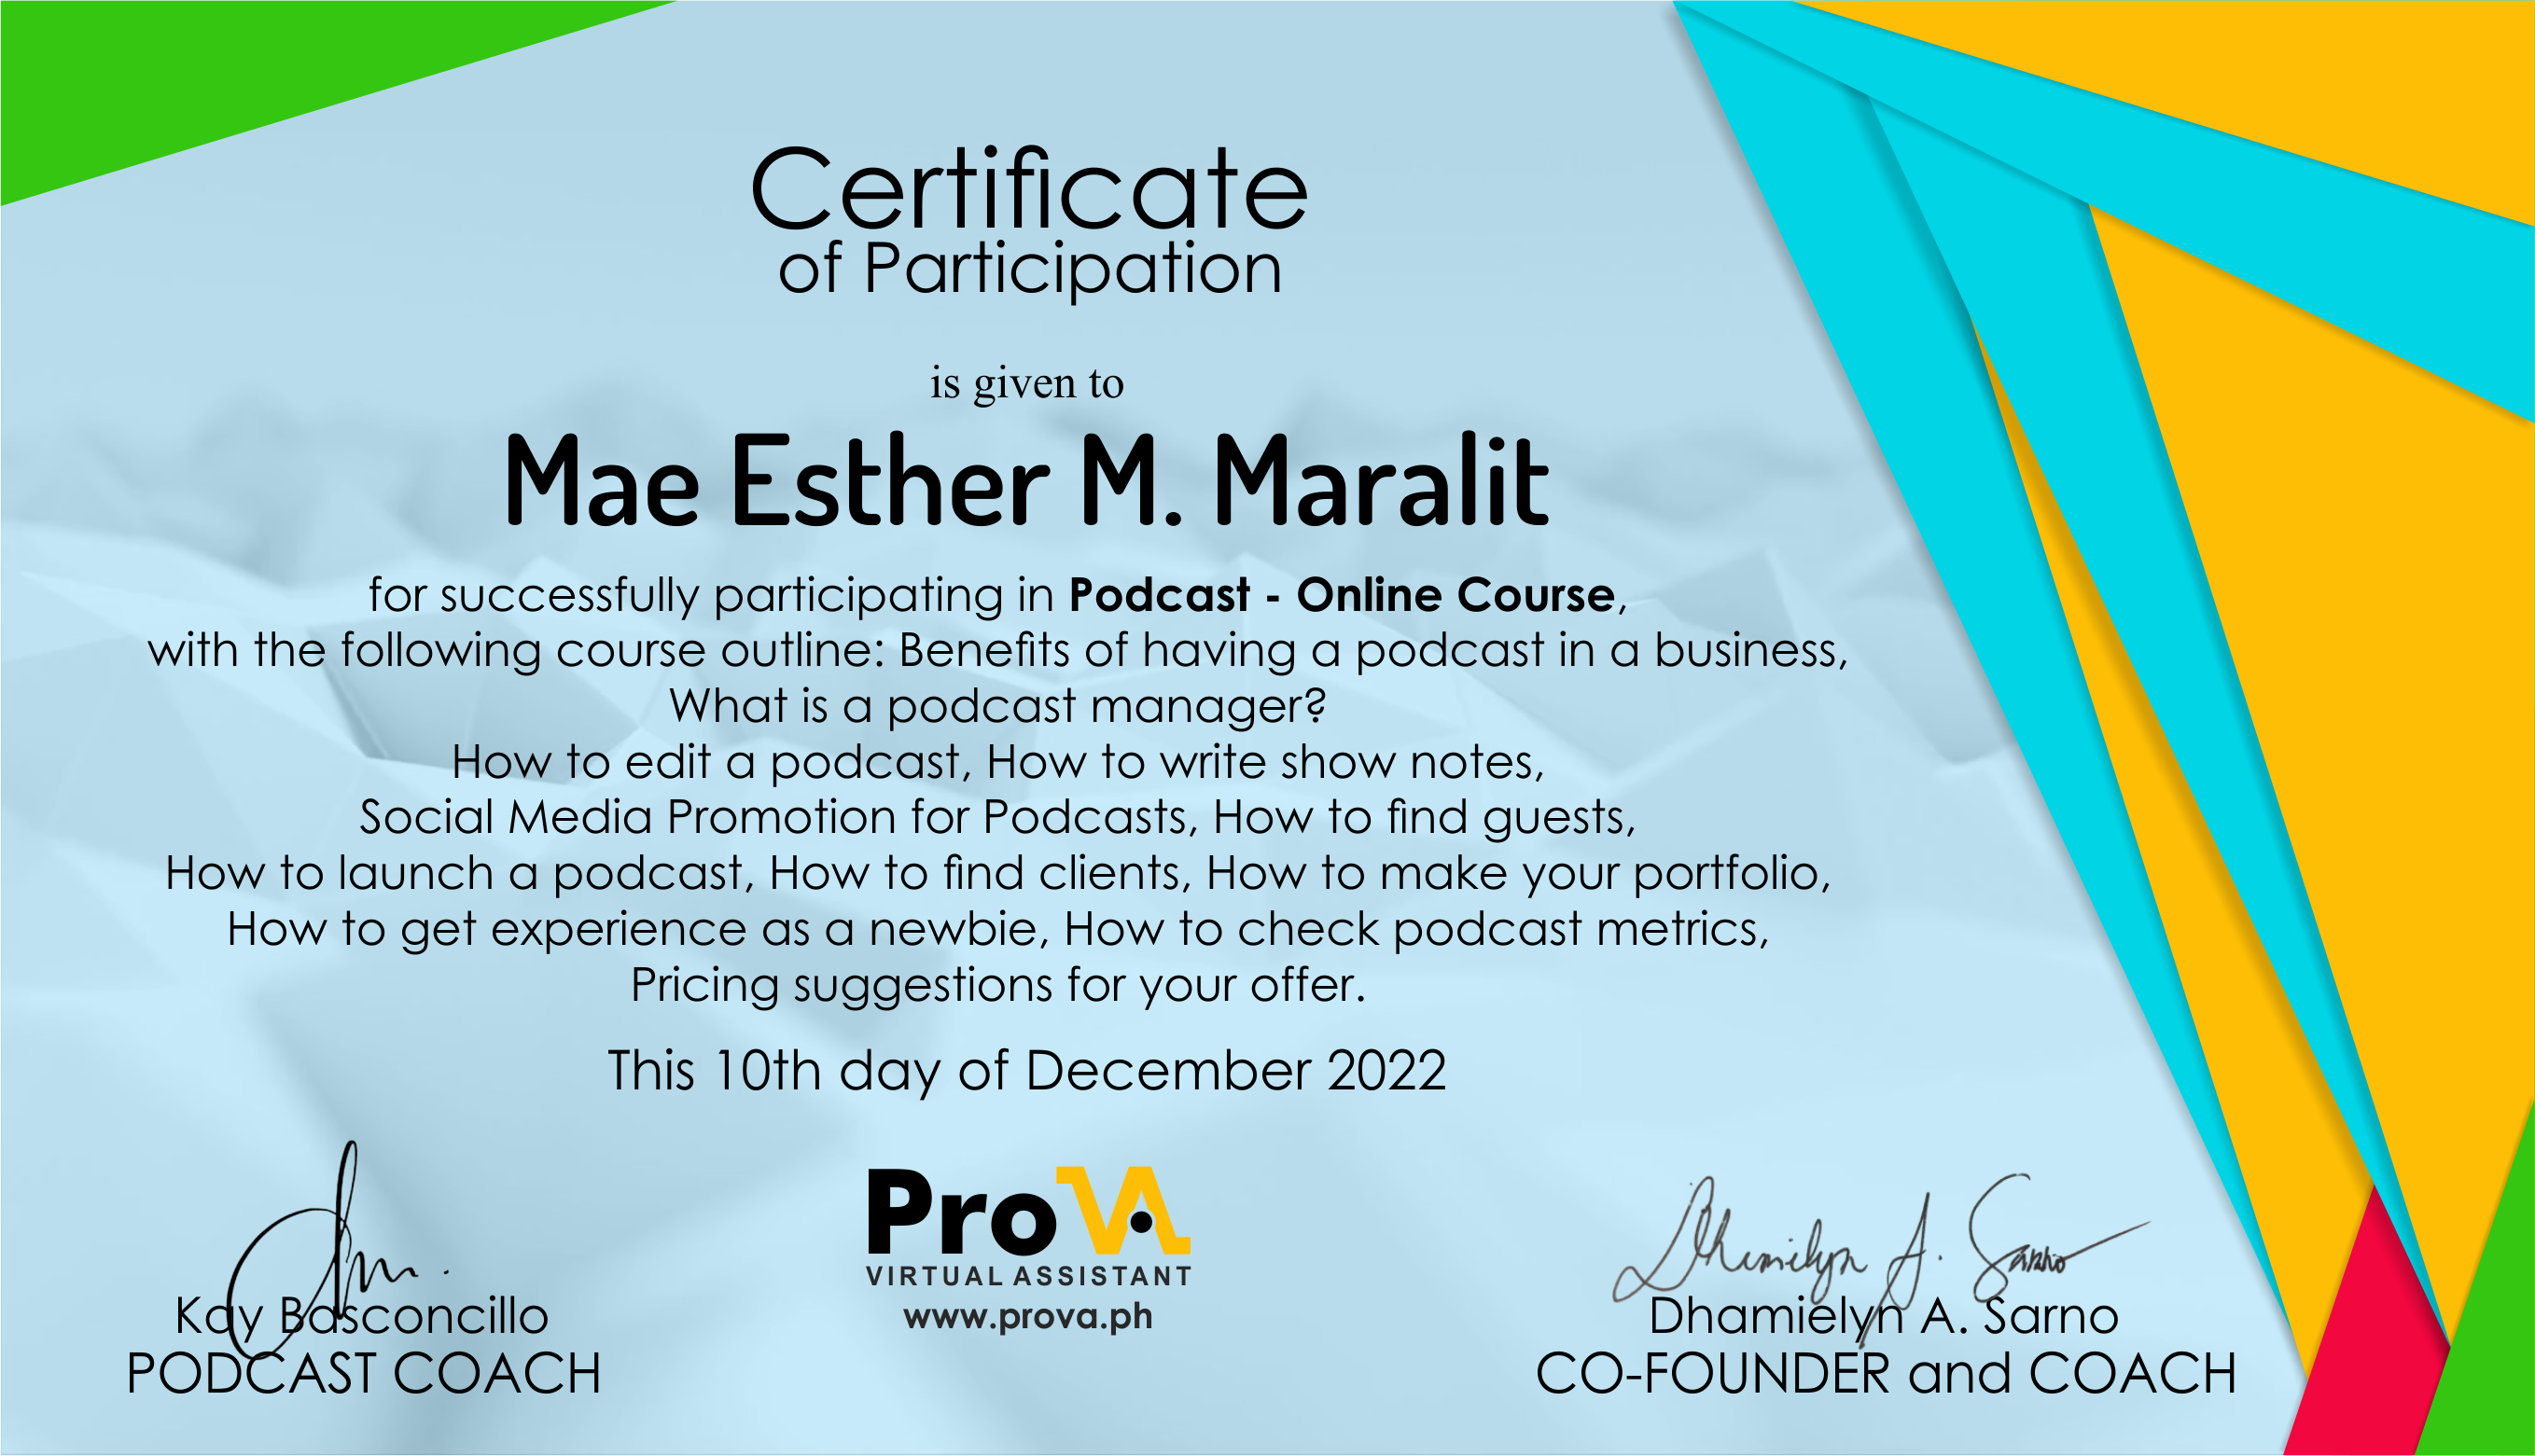 Podcast Management Training Certificate